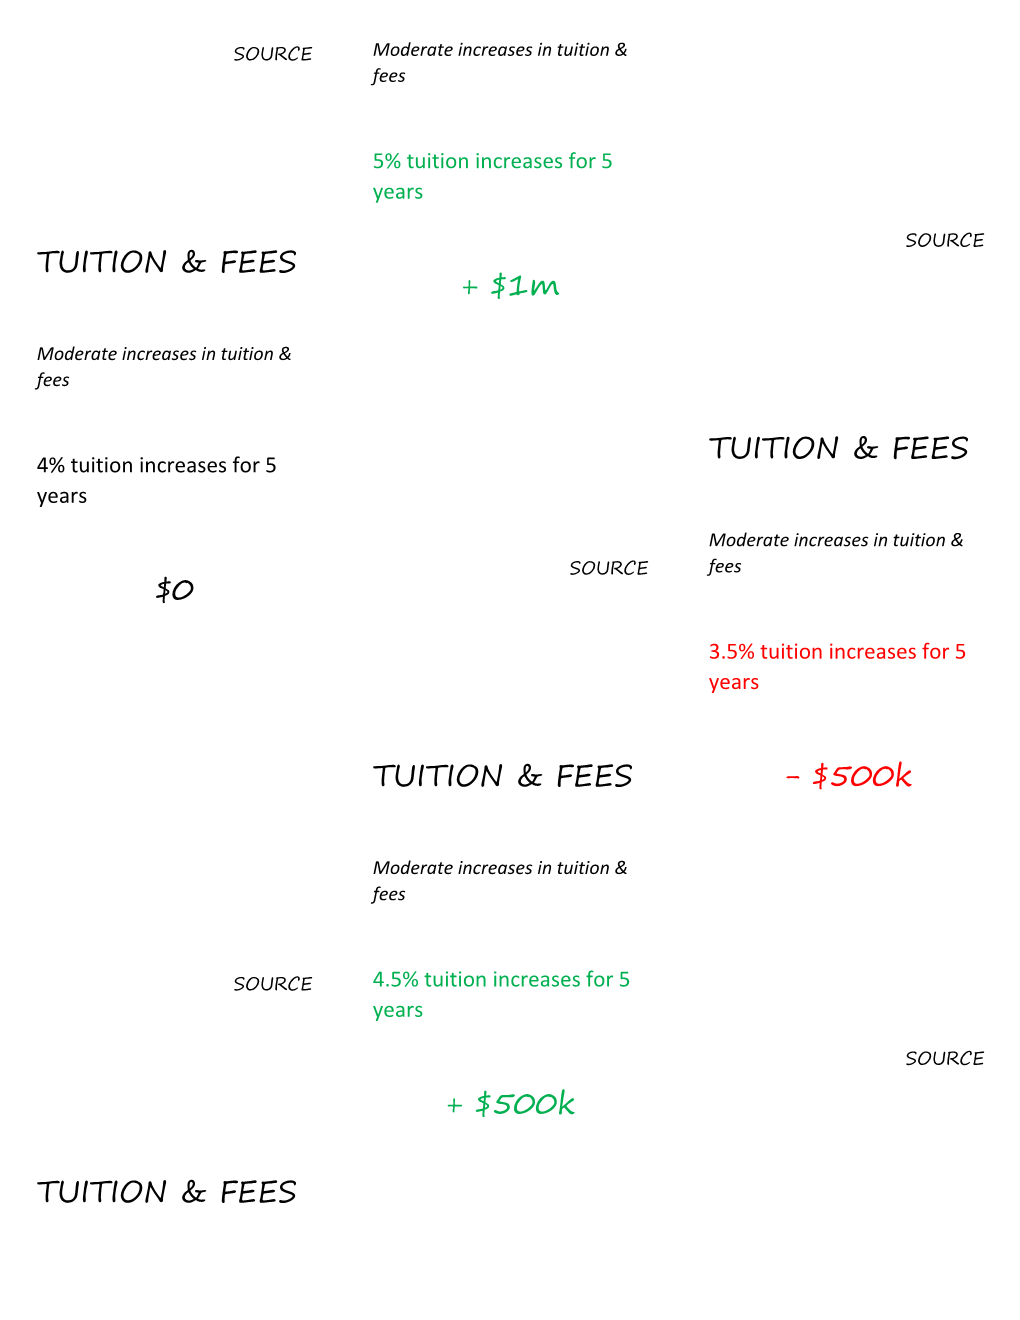 Moderate Increases in Tuition & Fees